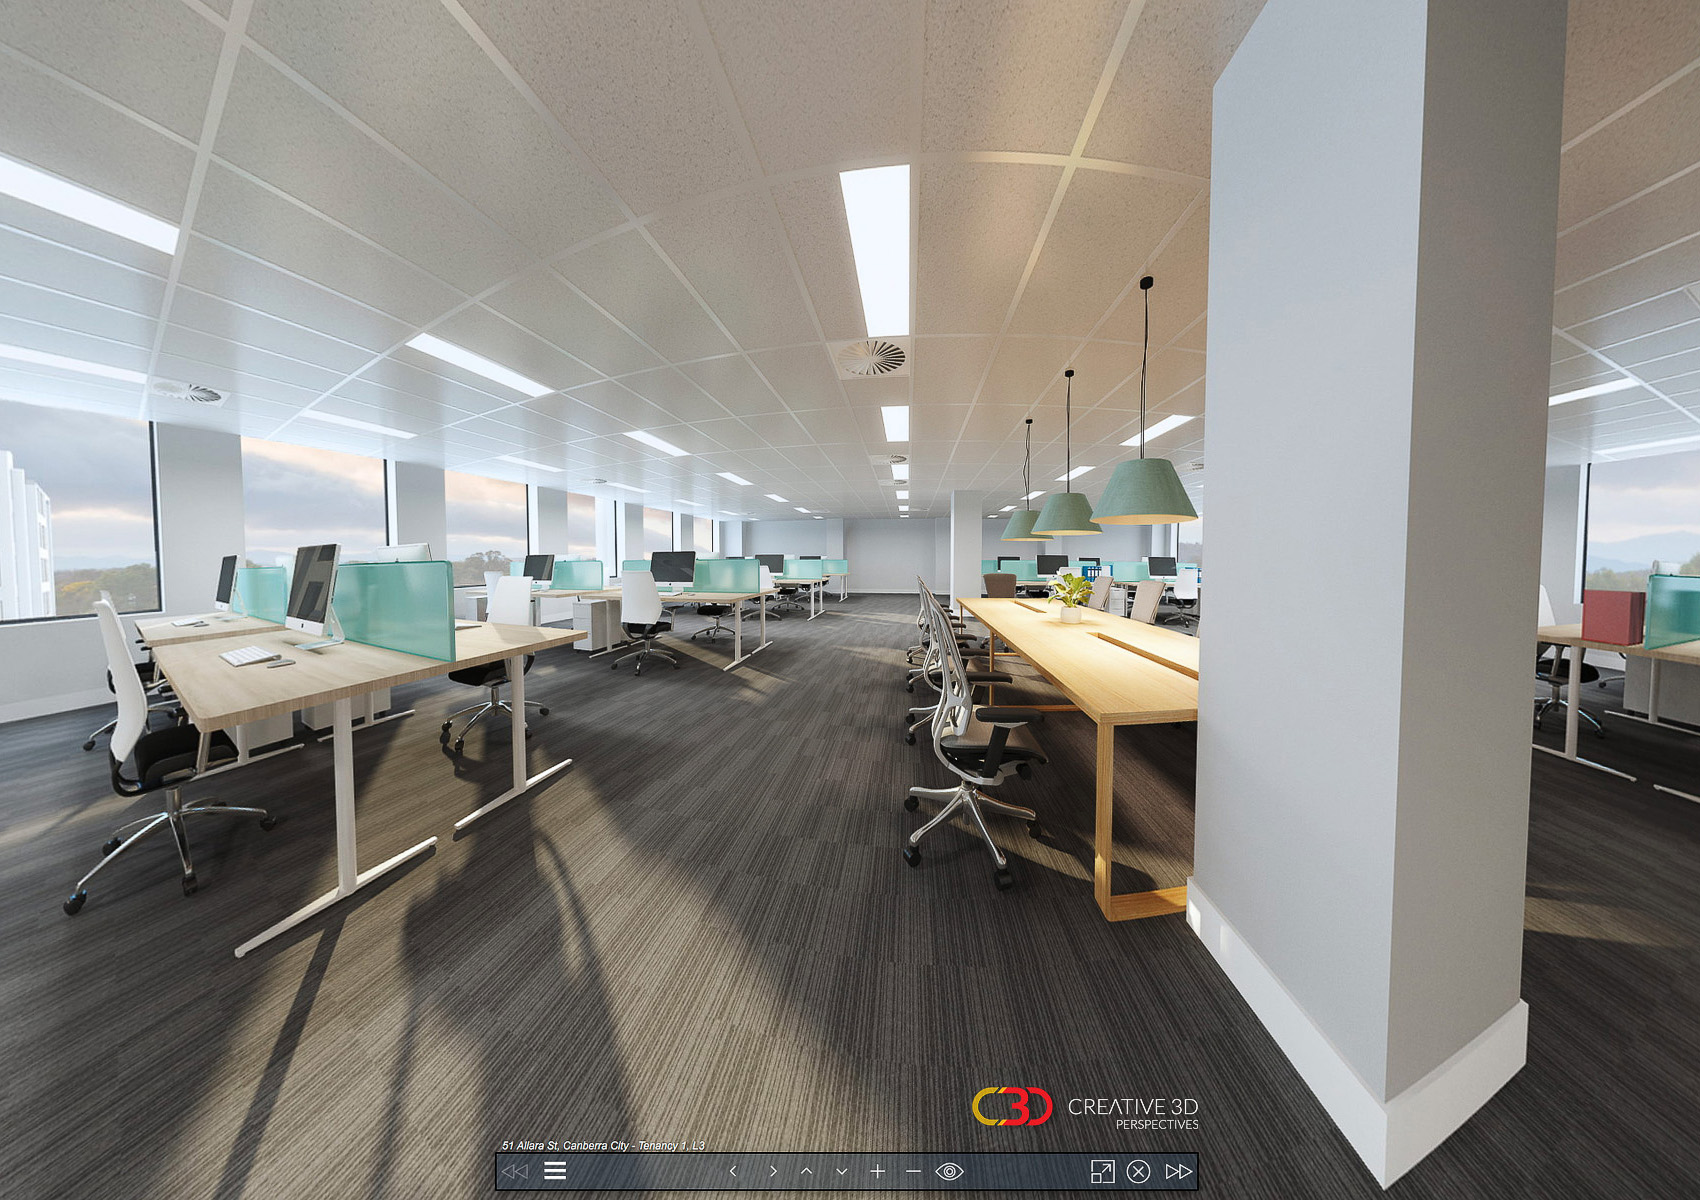 Creative 3D Perspective interior office screenshot from a virtual tour